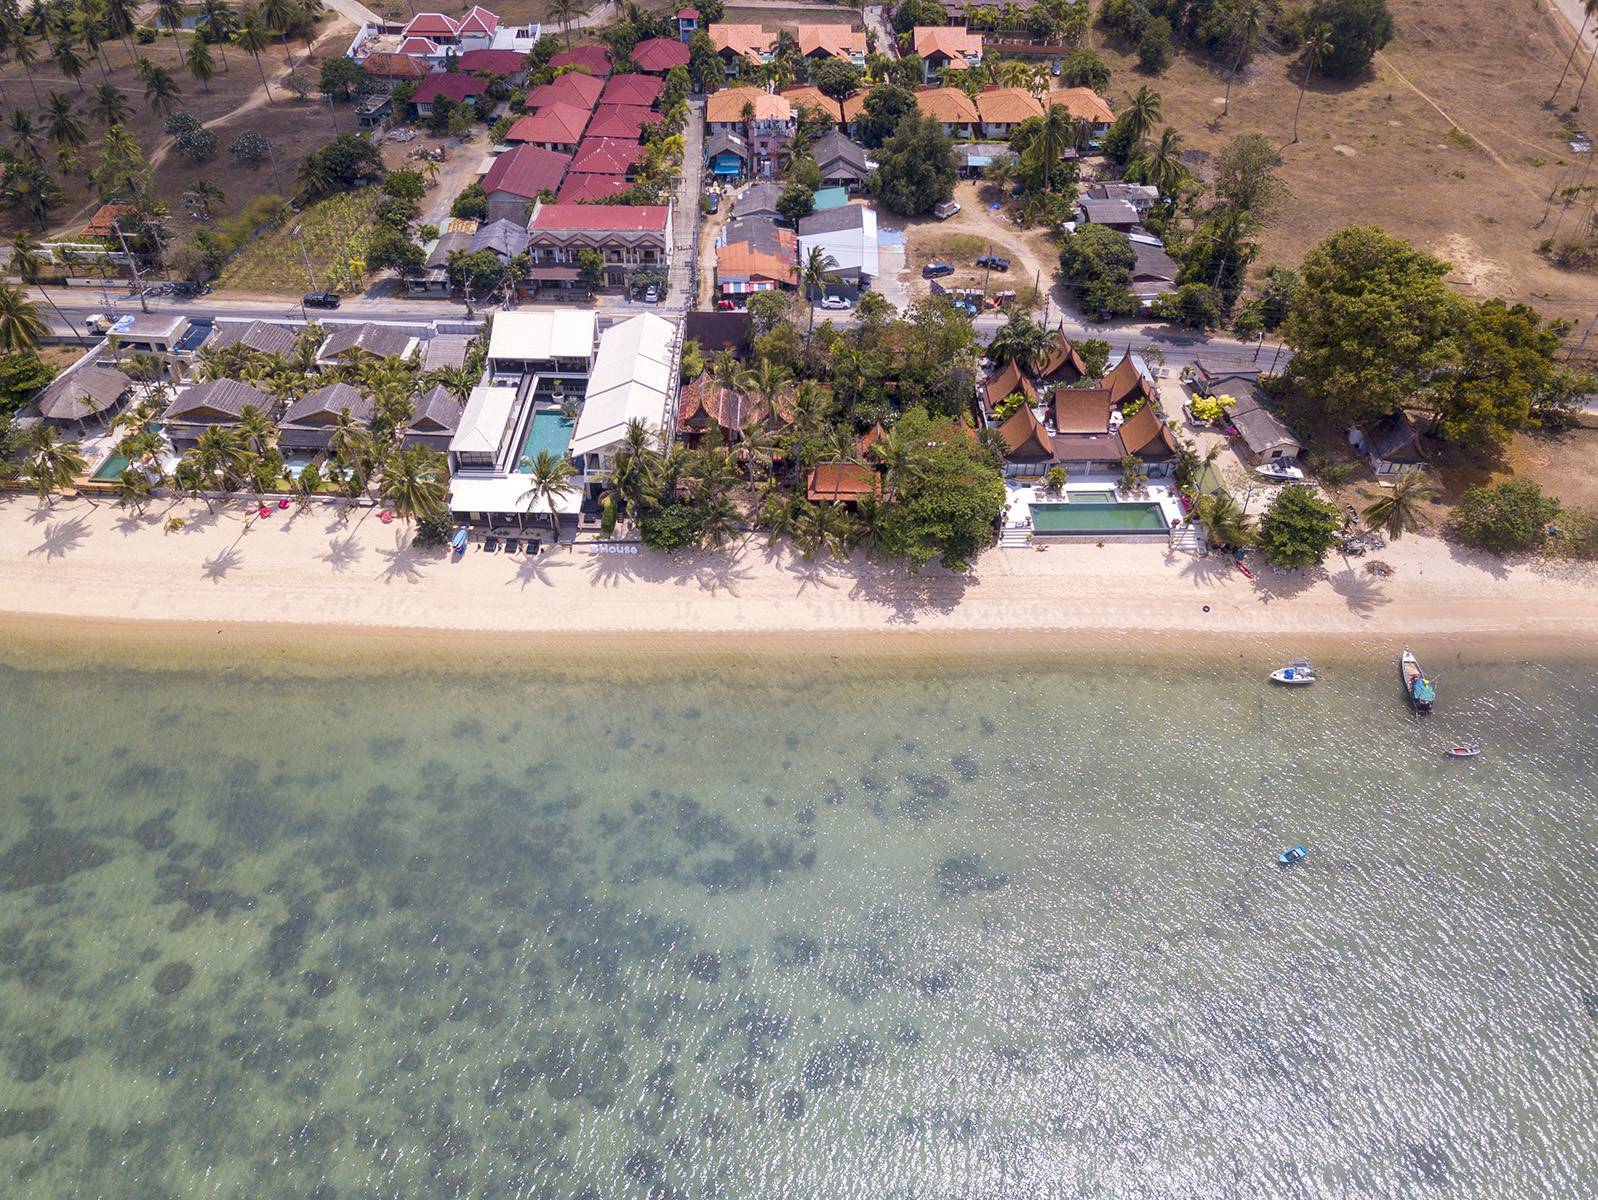 Beach Front Land For Sale – With Original Spa – Bangrak Beach: Beach Front Land For Sale – With Original Spa – Bangrak Beach